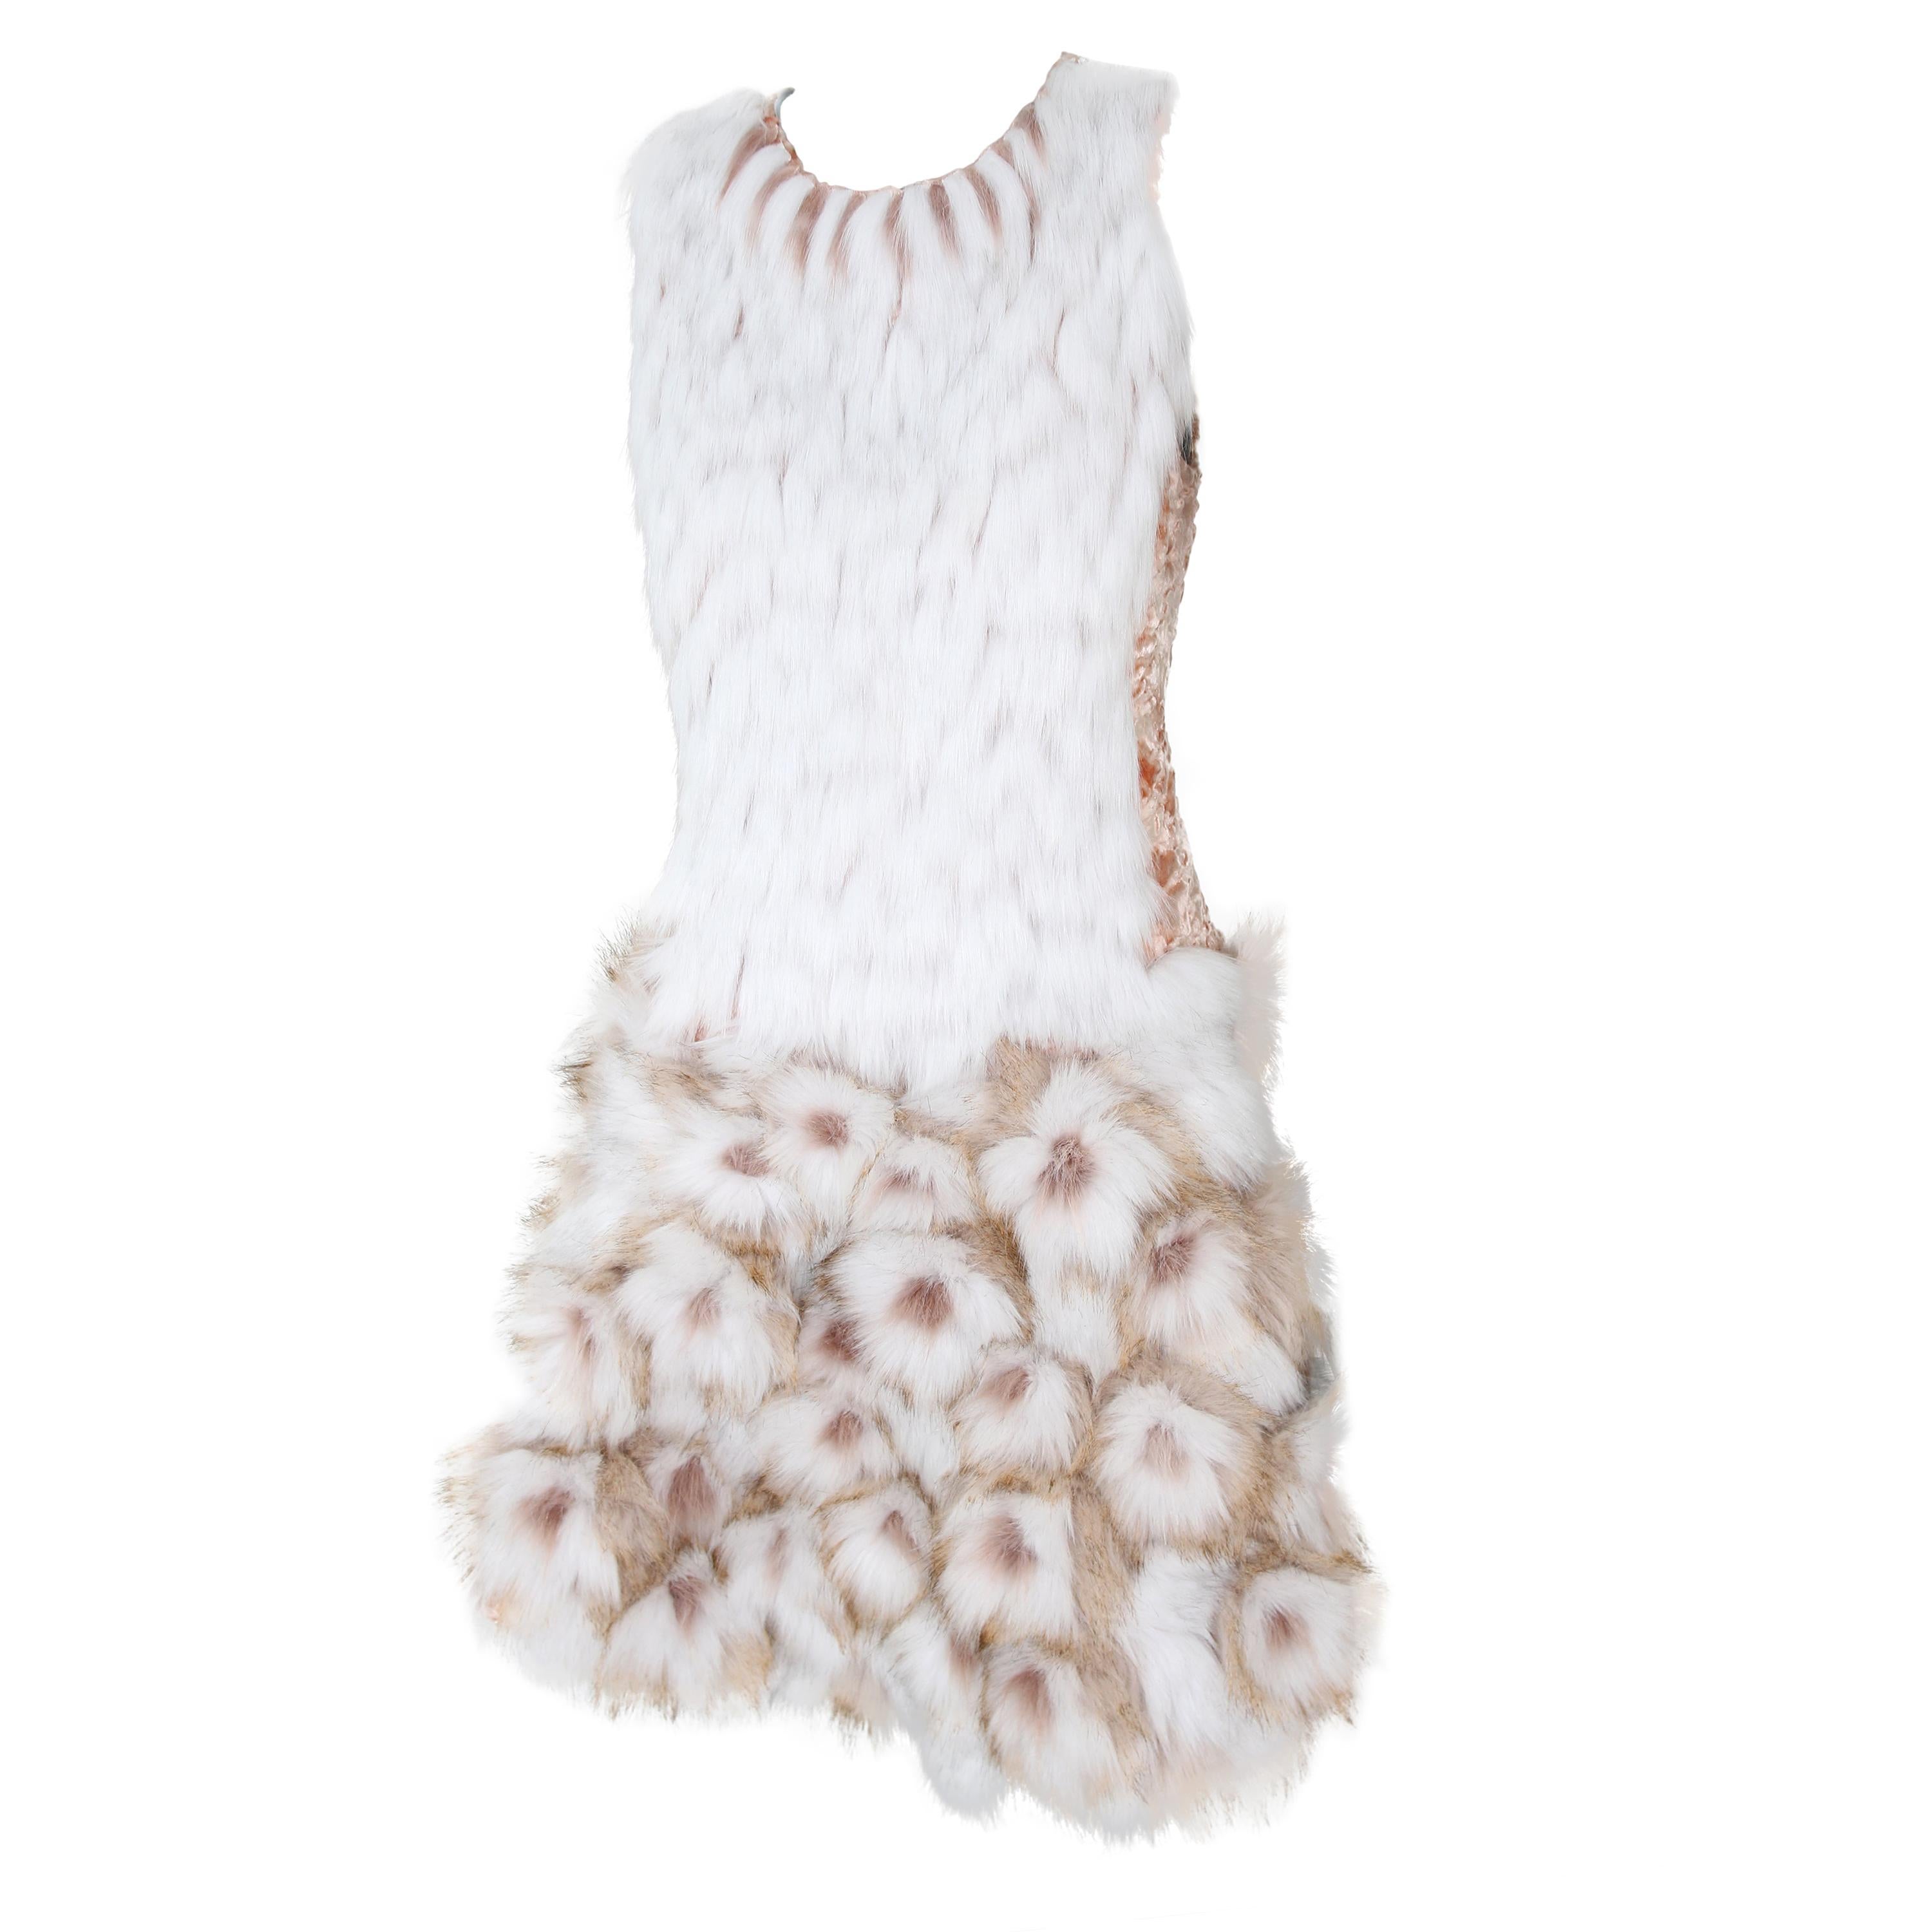 Pelush Couture White Faux Fur Dress With Three Dimensional Flowers - Small For Sale